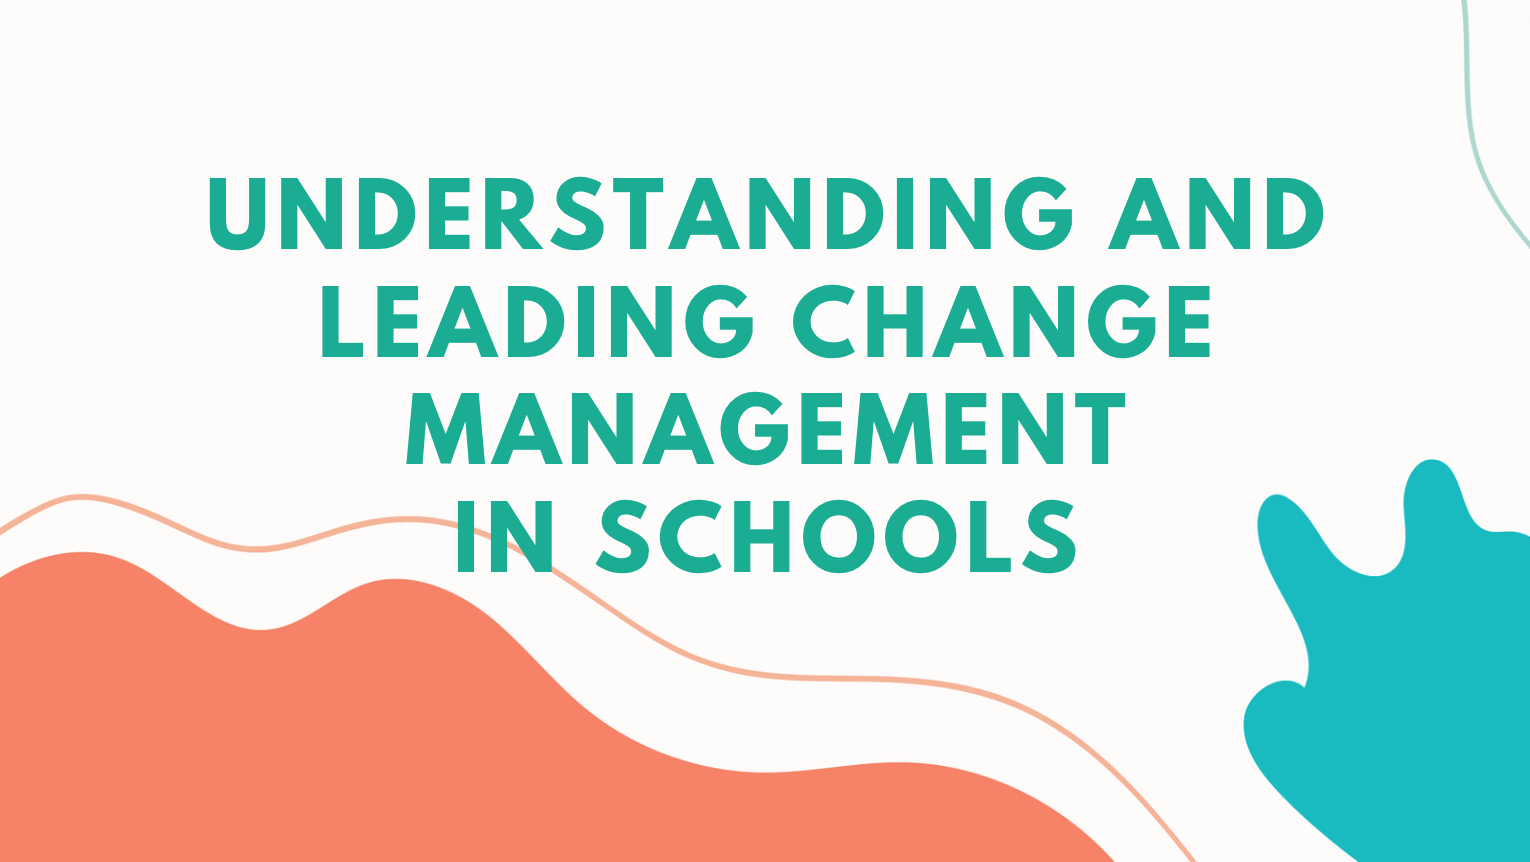 change management process in education